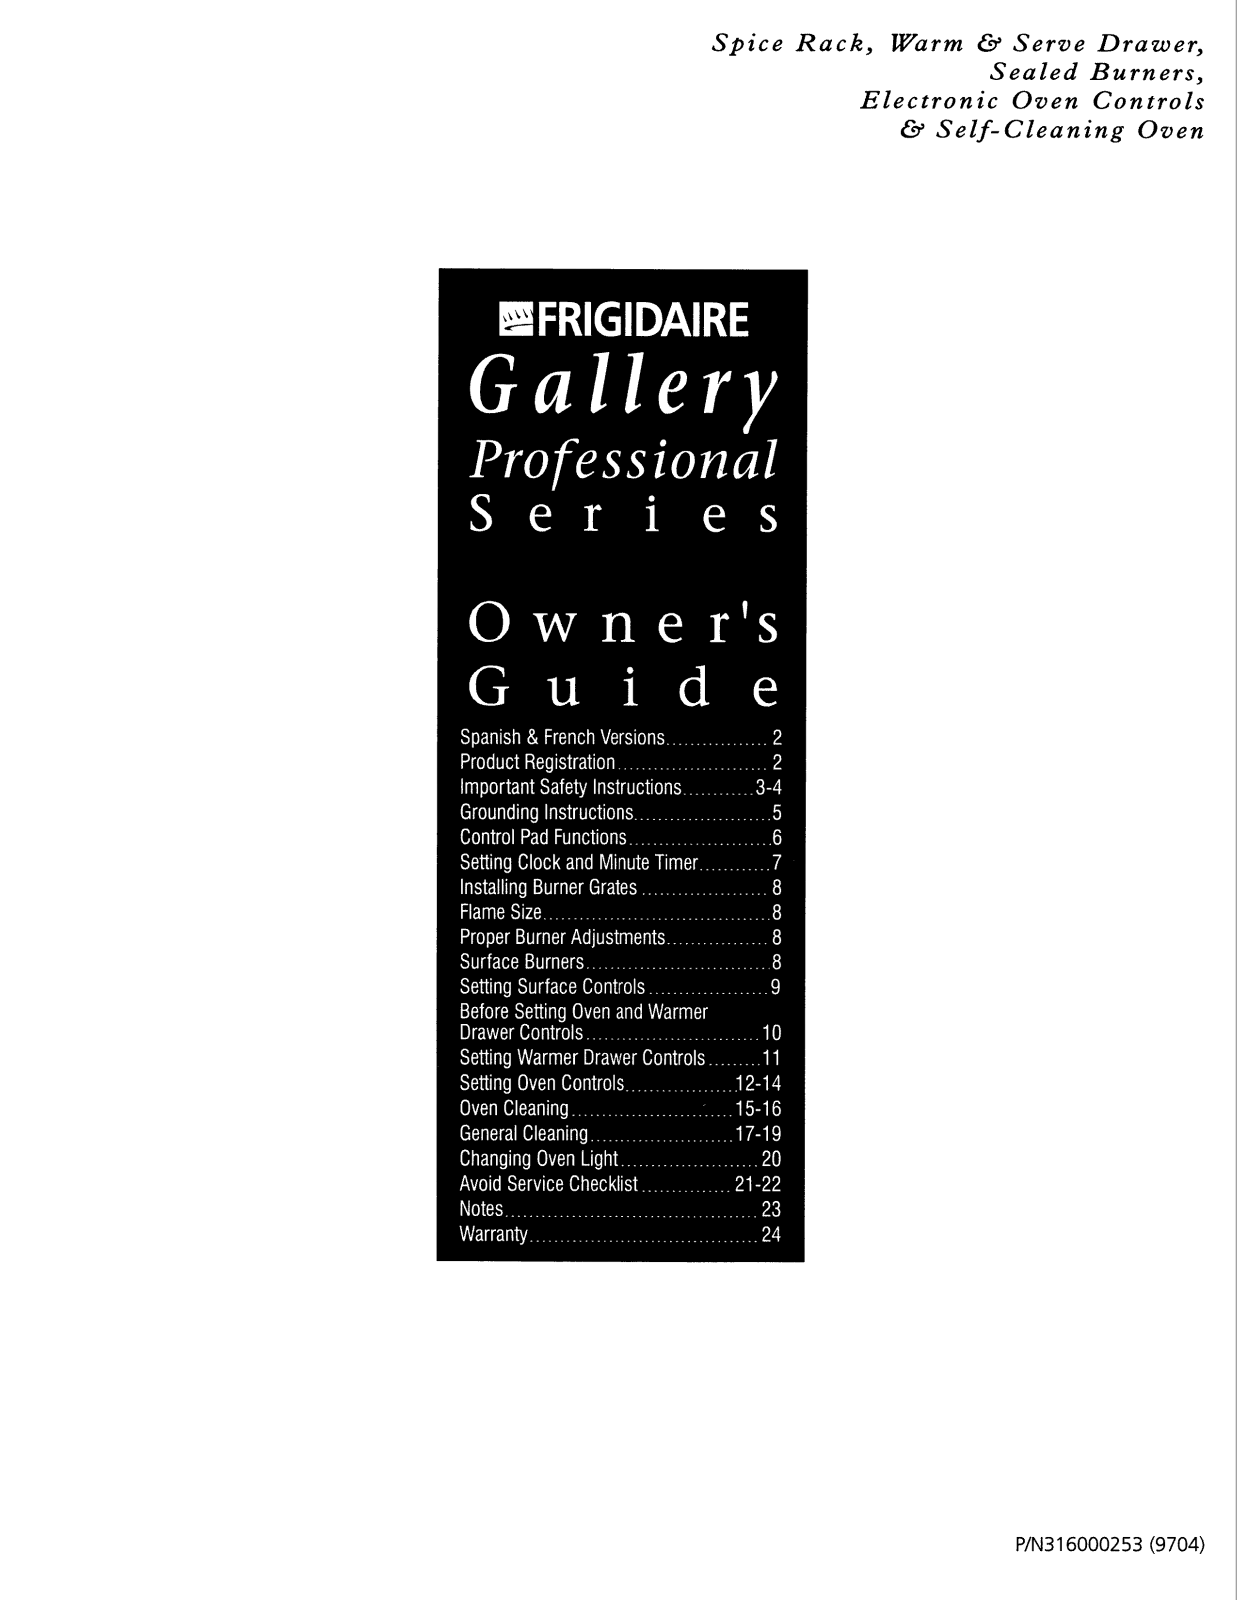 Frigidaire FGF379WESP, FGF379WESN, FGF379WESM, FGF379WESL, FGF379WESK Owner’s Manual